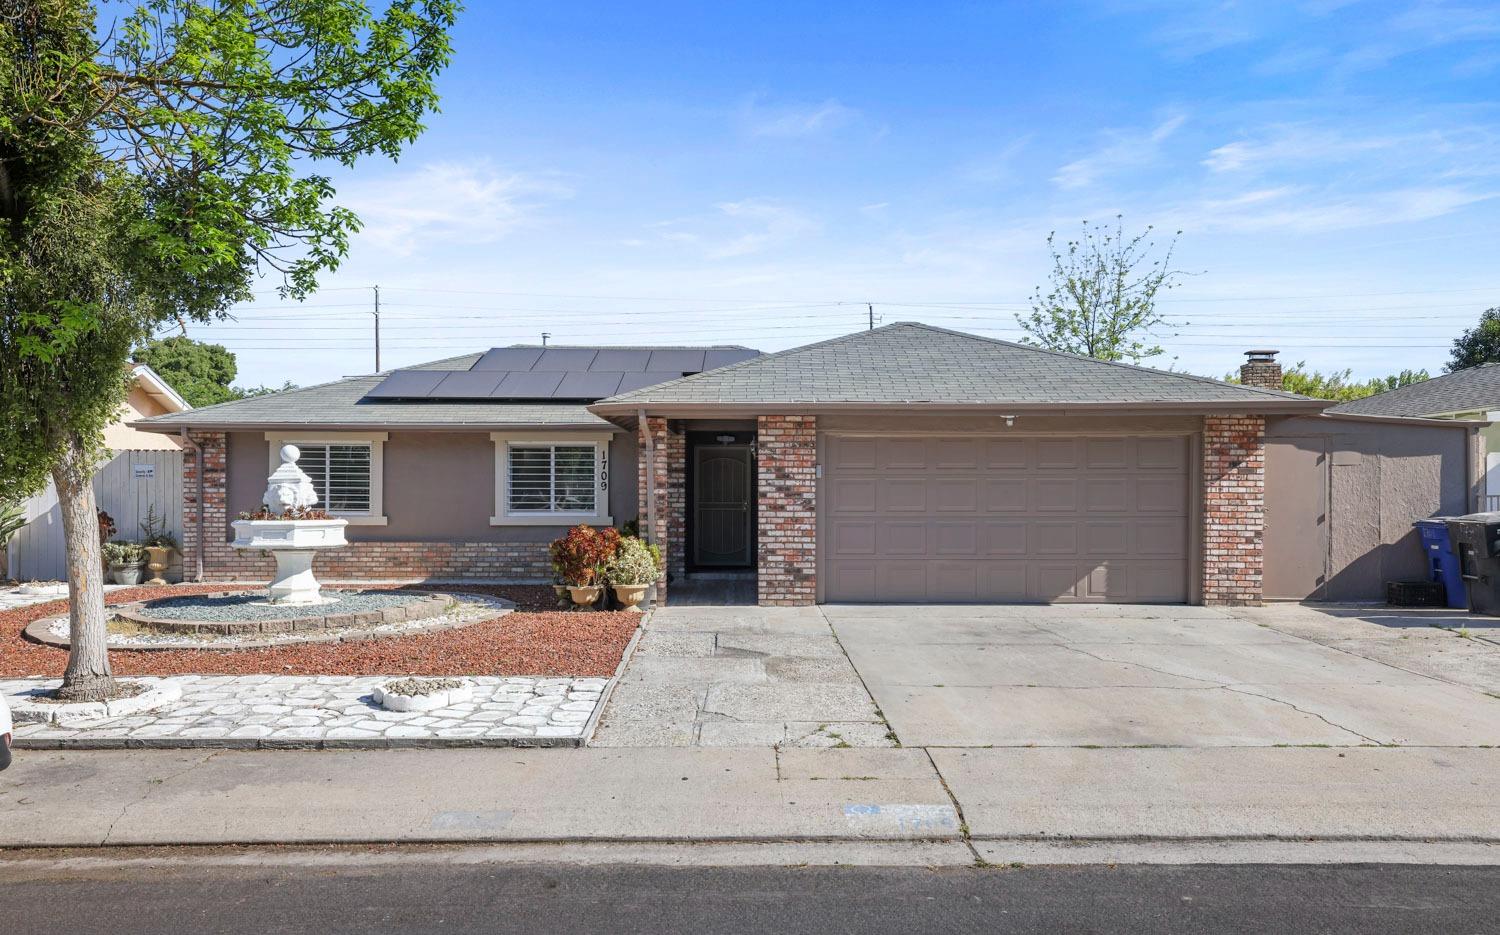 Photo of 1709 Chapala Wy in Modesto, CA